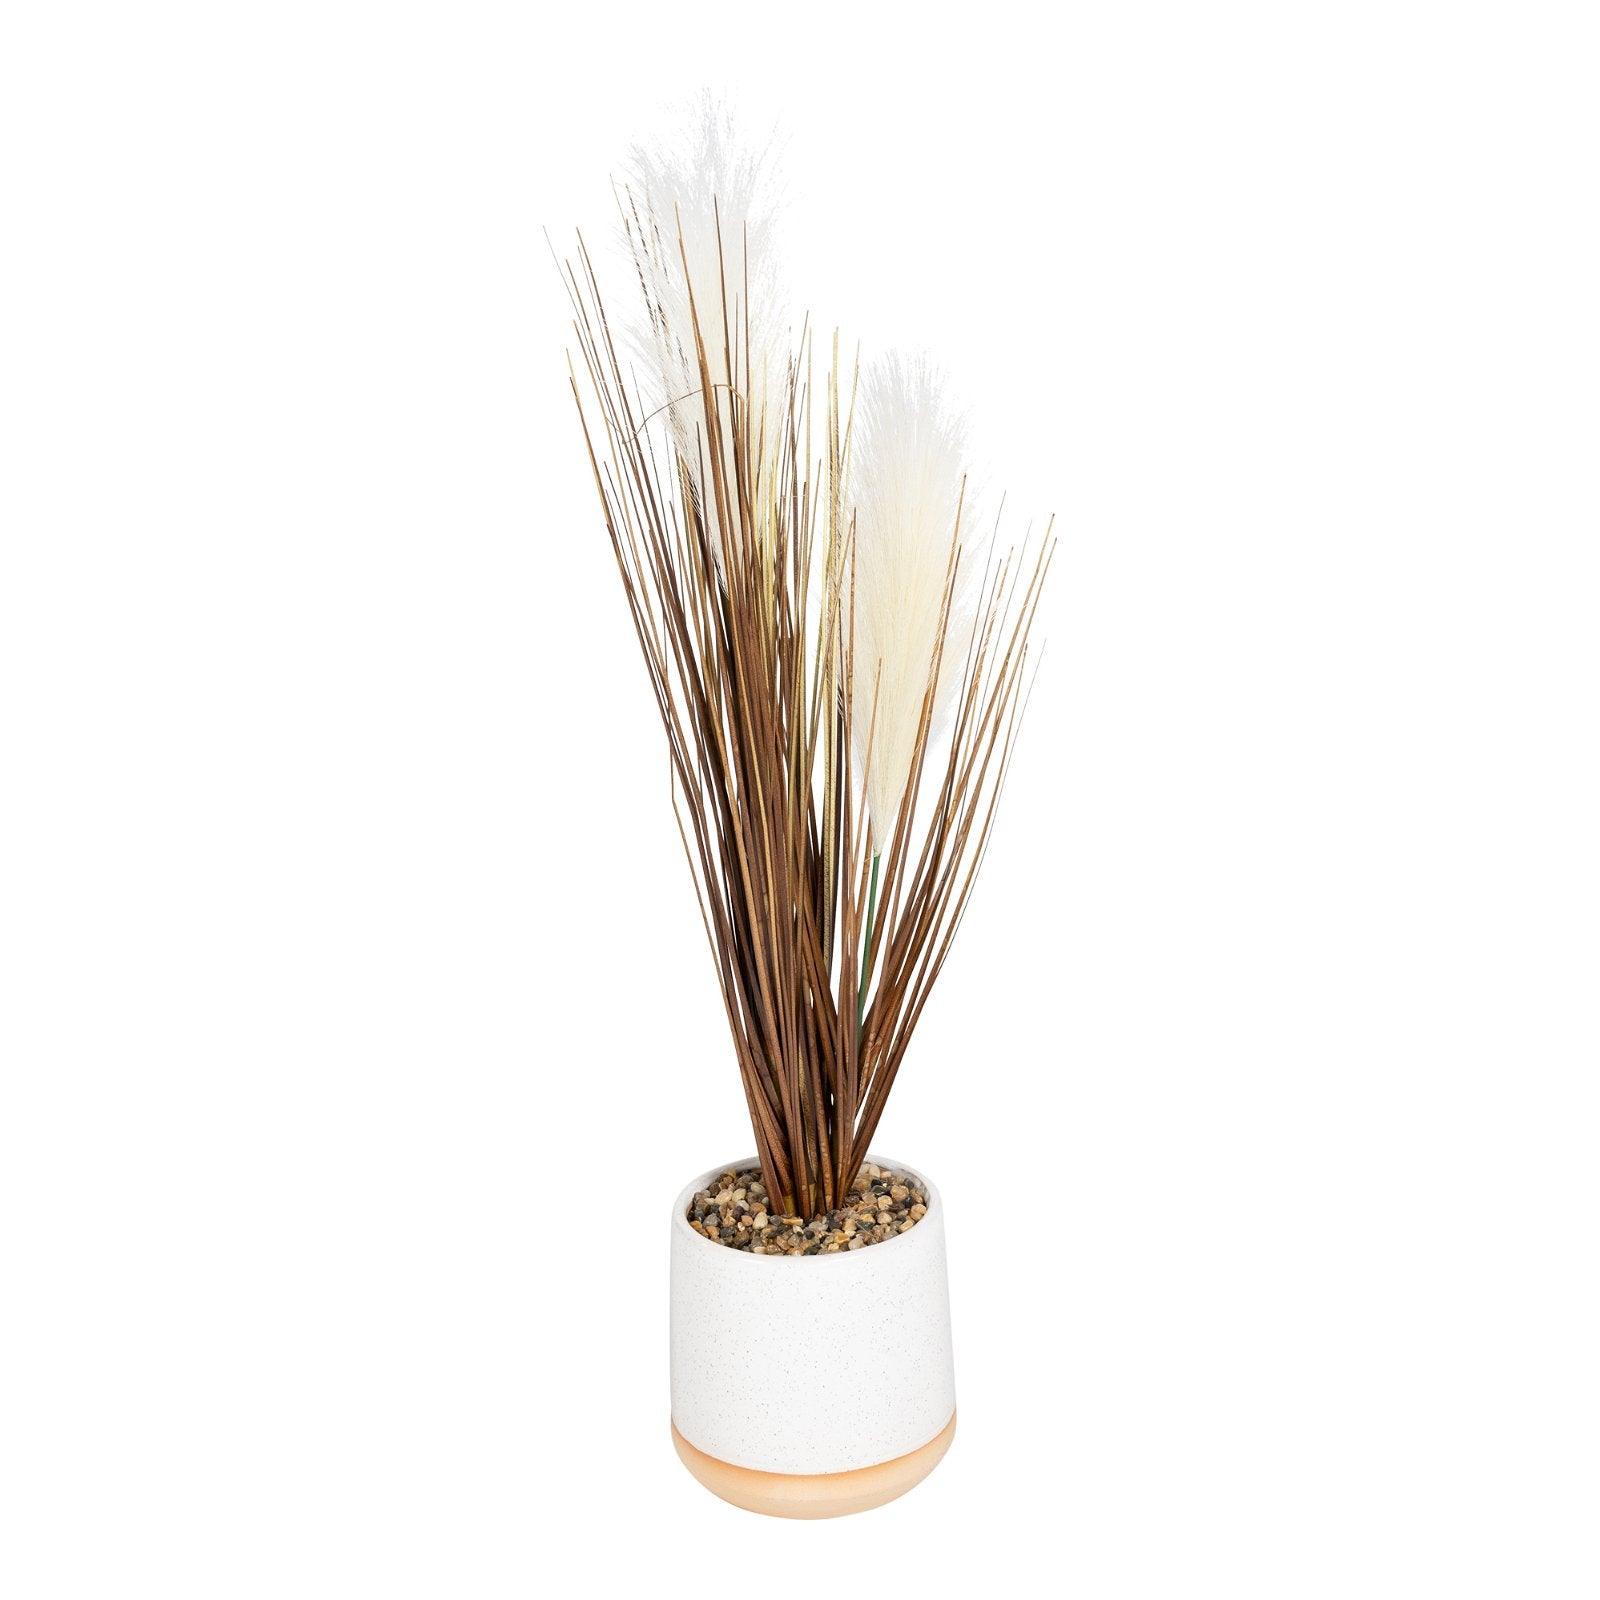 Artificial Grasses In A White Pot With White Feathers - 50cm-Artificial Plants